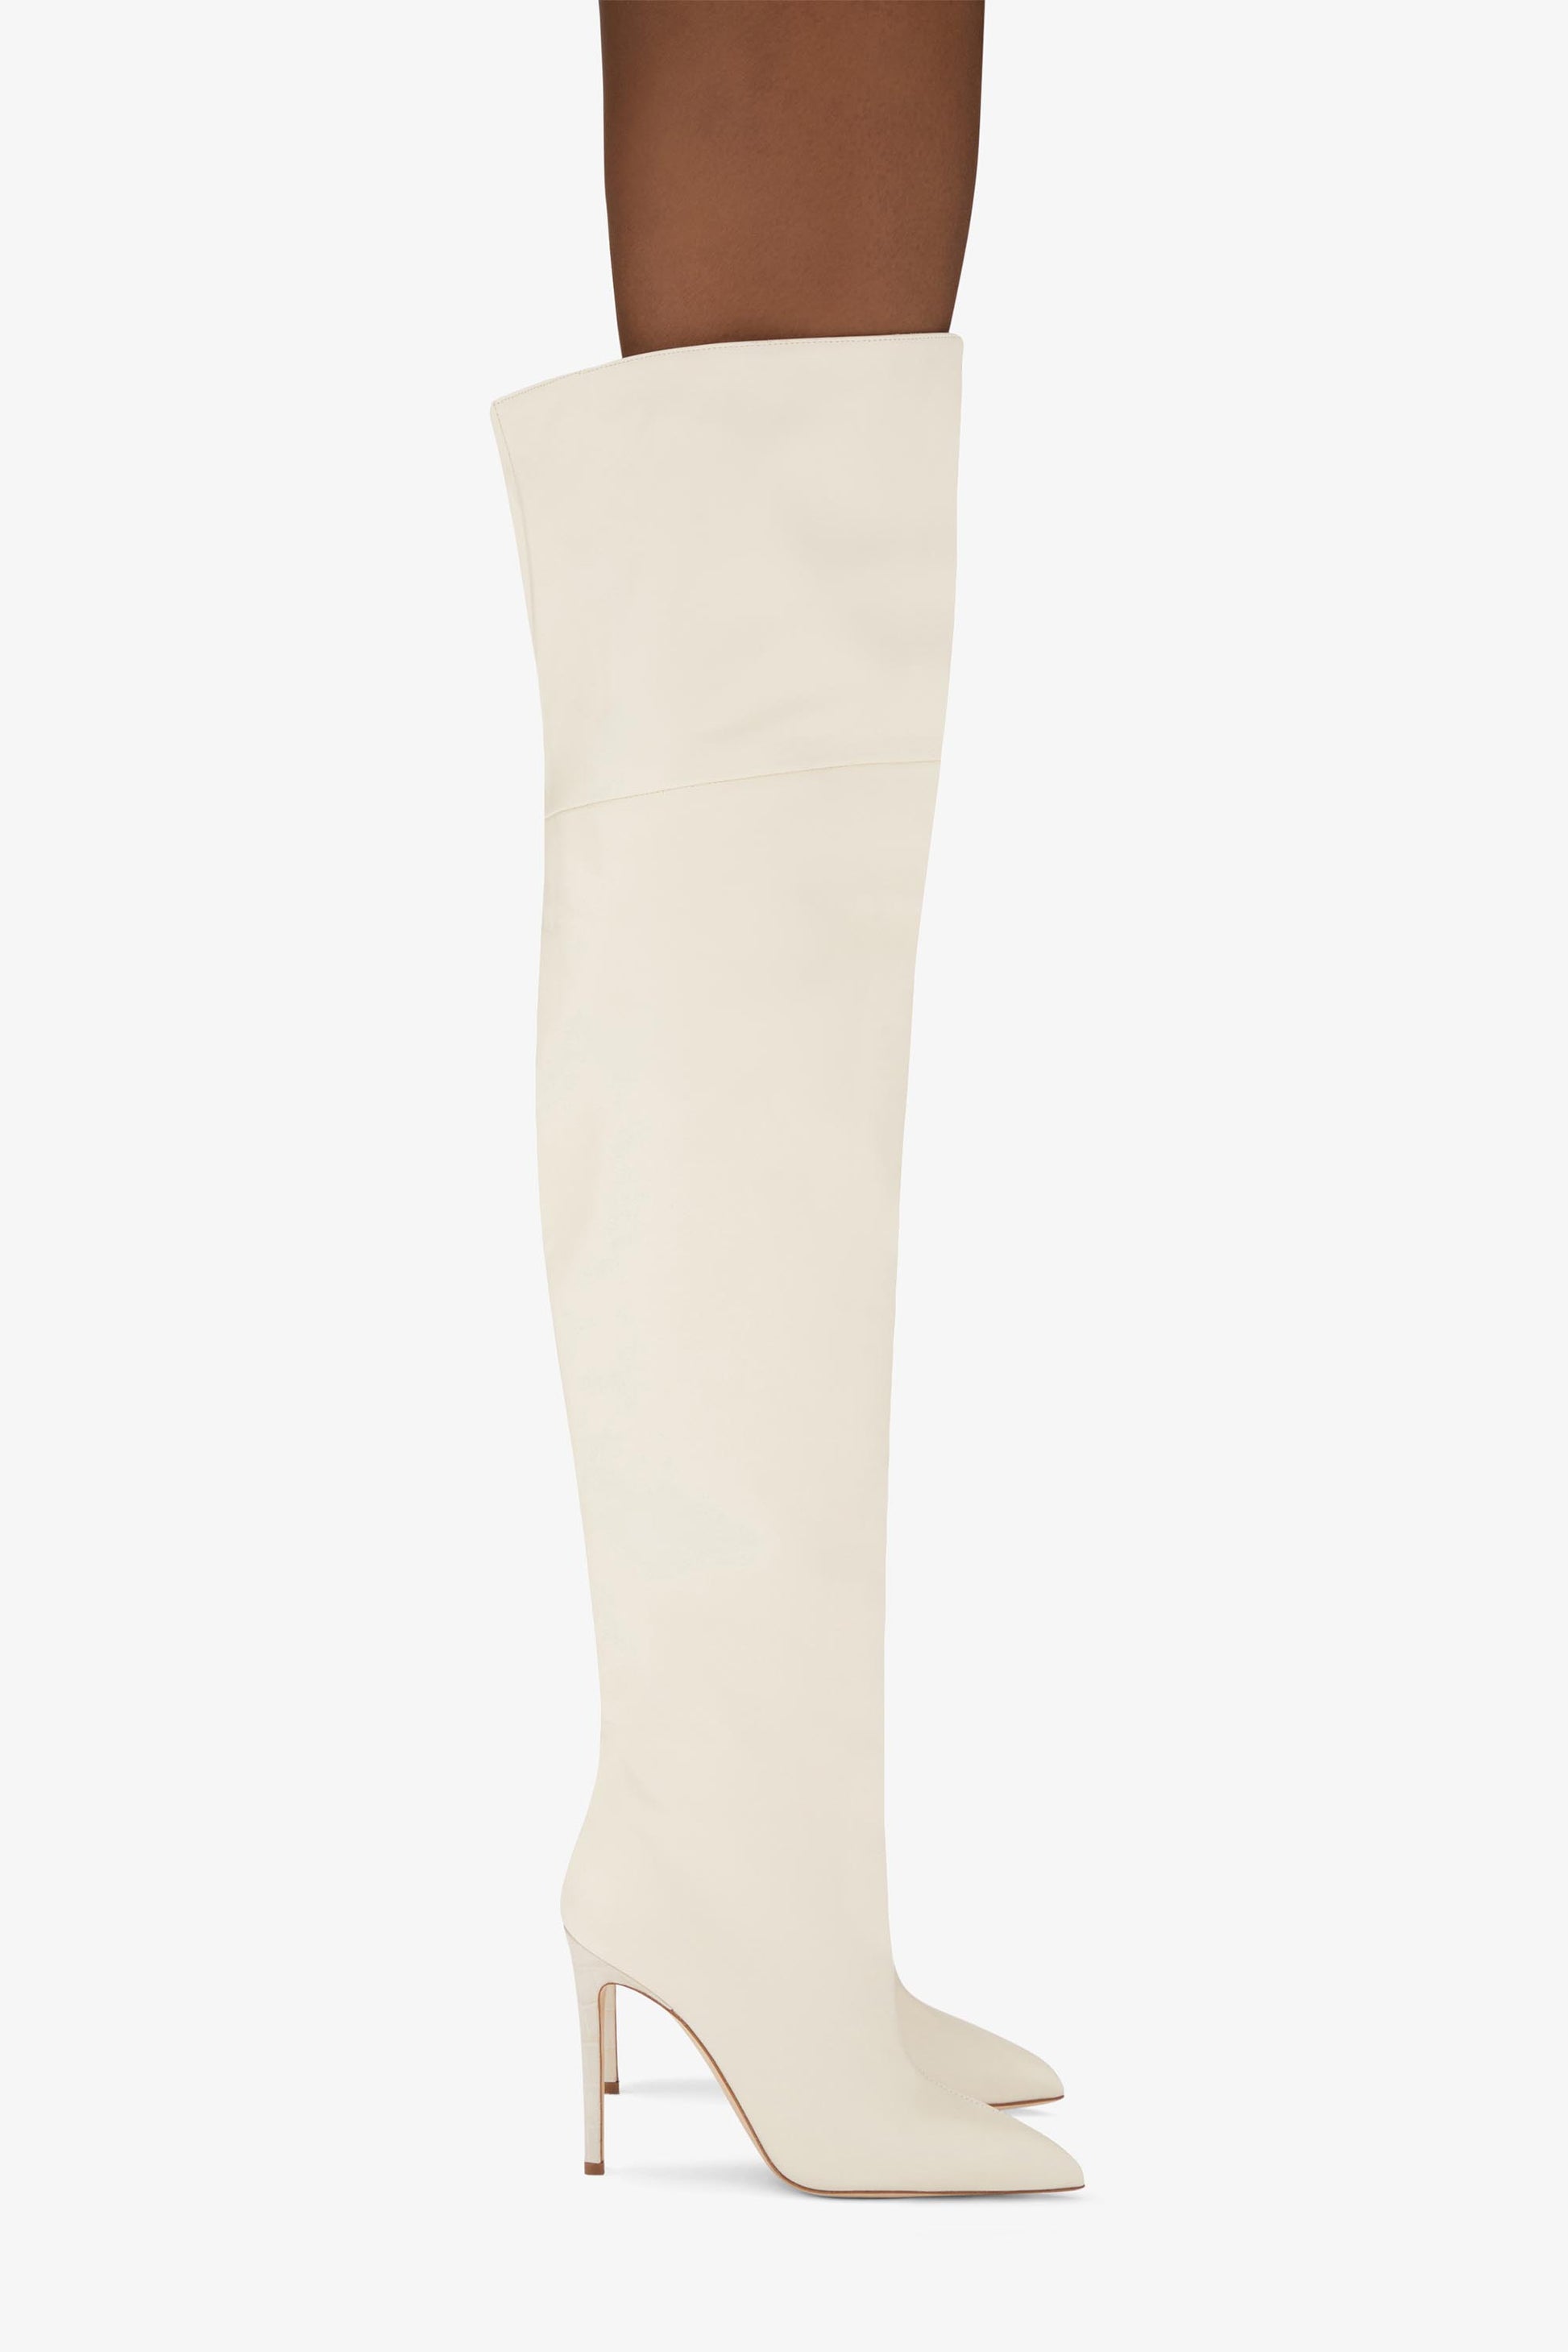 Vanilla nappa leather stiletto over the knee boots - Product worn